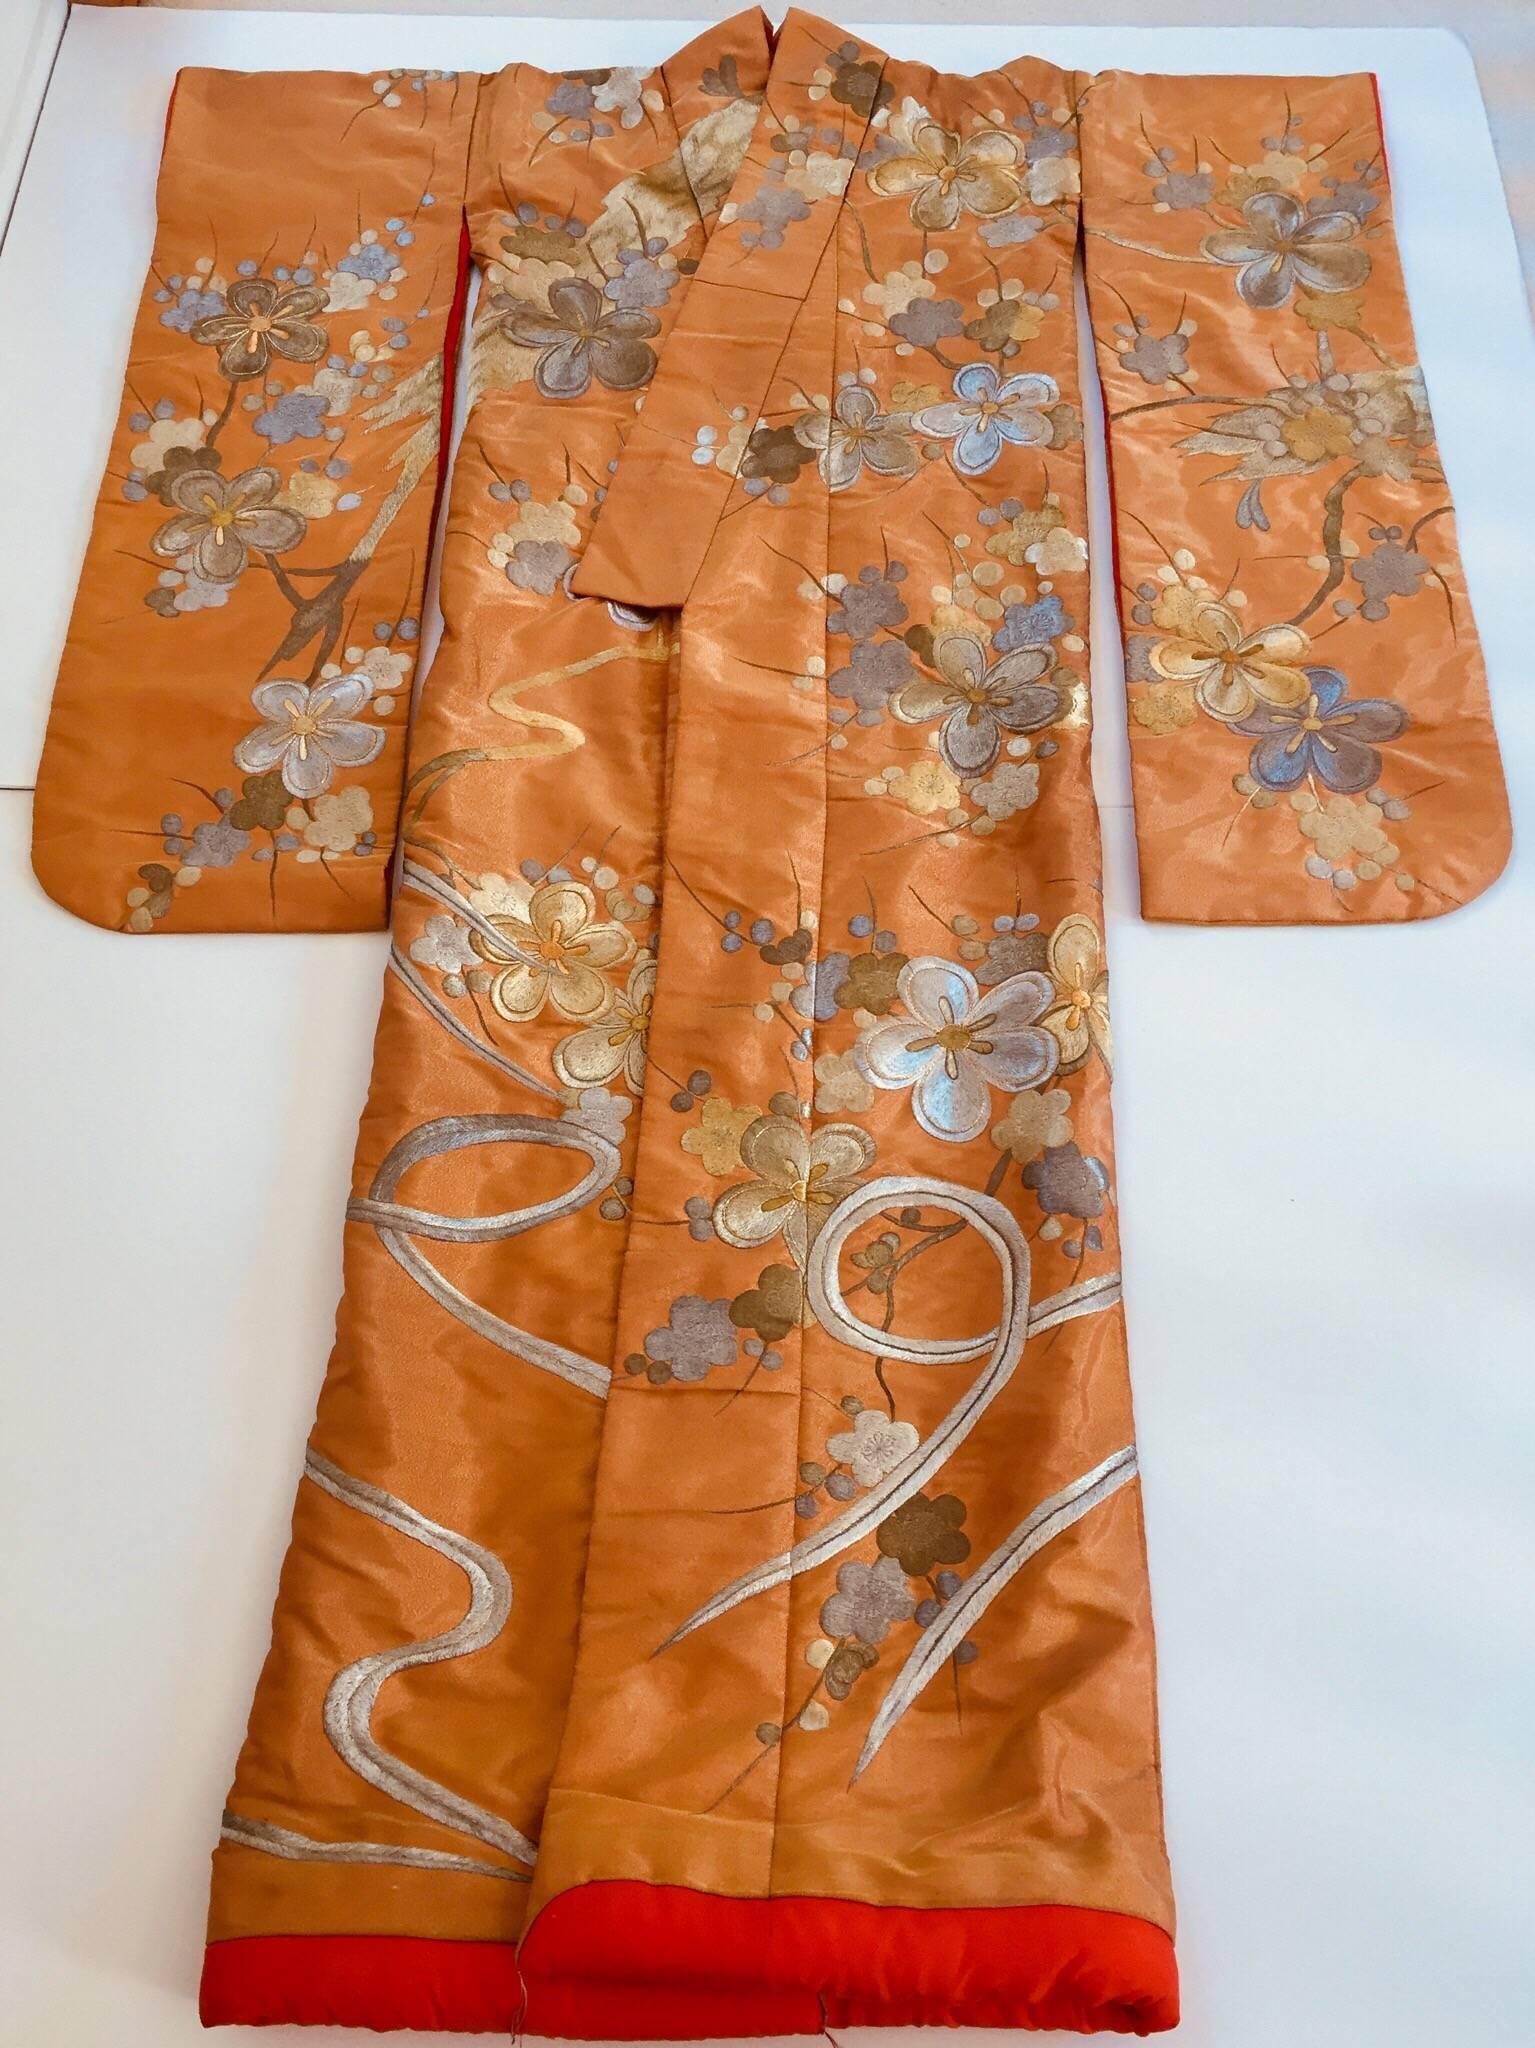 Vintage brocade Japanese ceremonial kimono a vintage midcentury orange and gold color collectable Japanese ceremonial kimono.
One of a kind handcrafted.
Fabulous museum quality ceremonial piece in silk with intricate detailed hand-embroidery